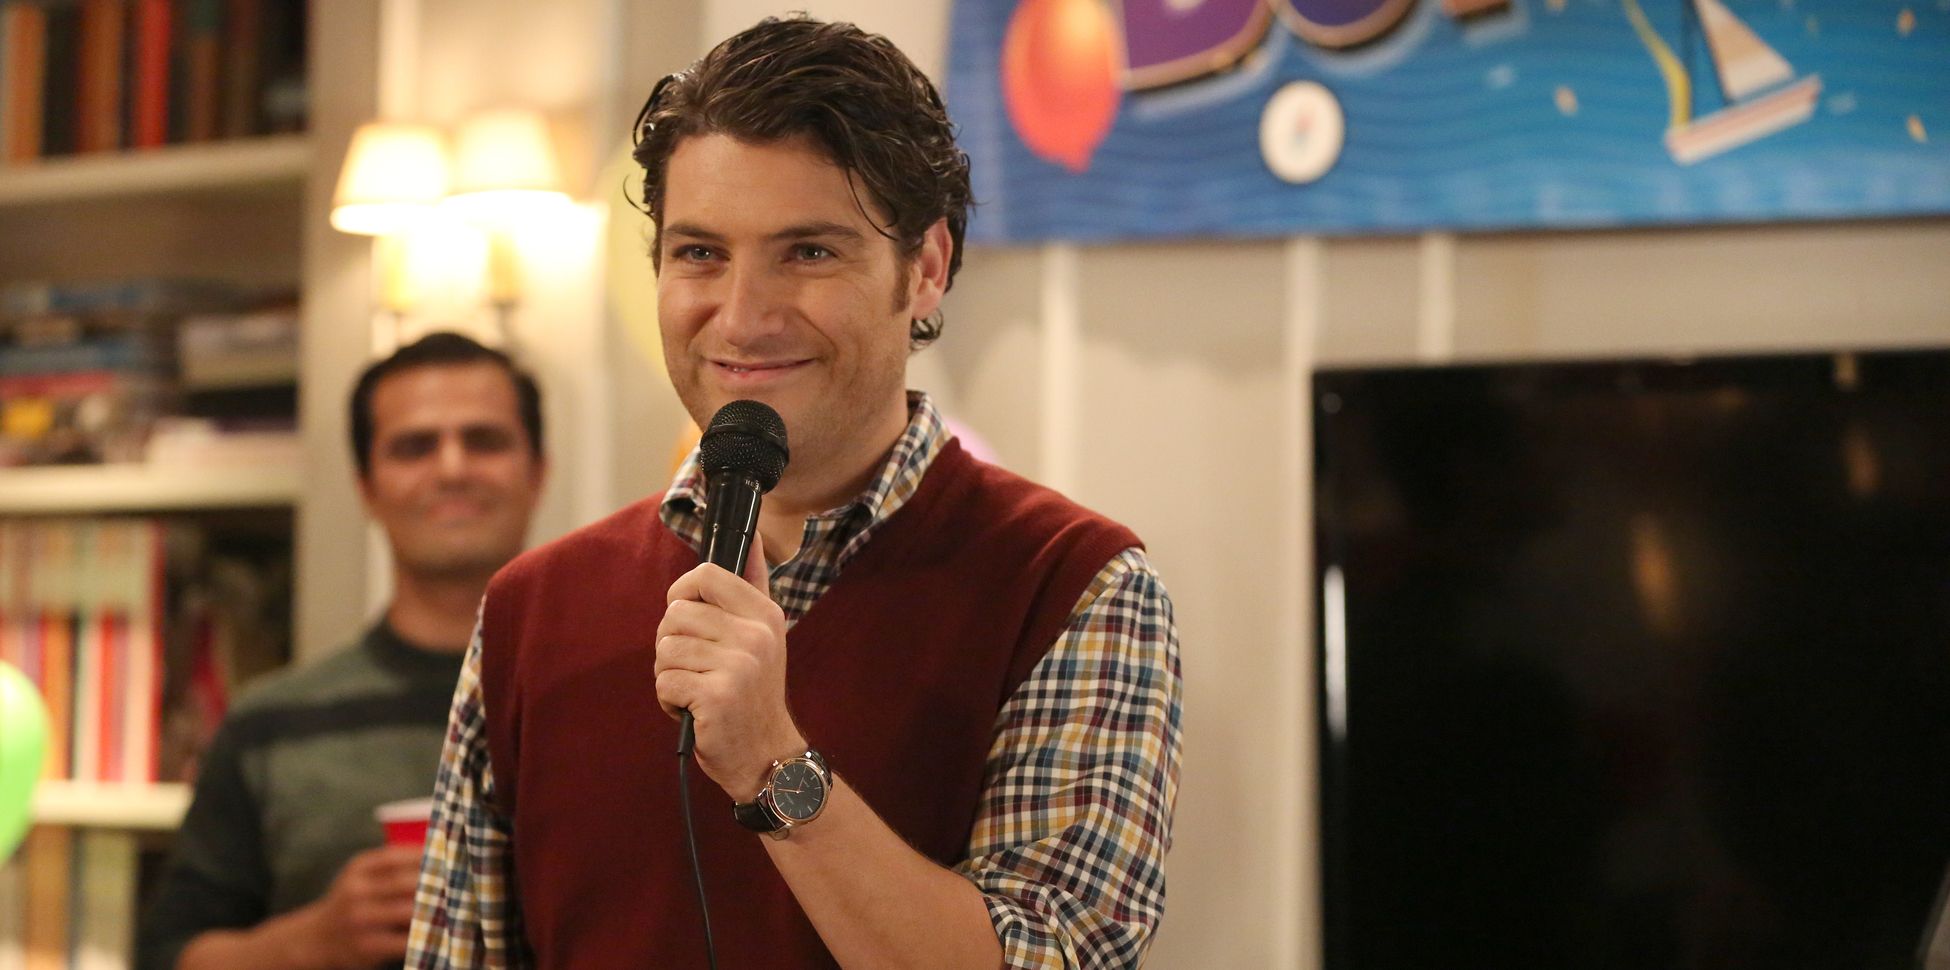 Adam Pally as Peter in The Mindy Project